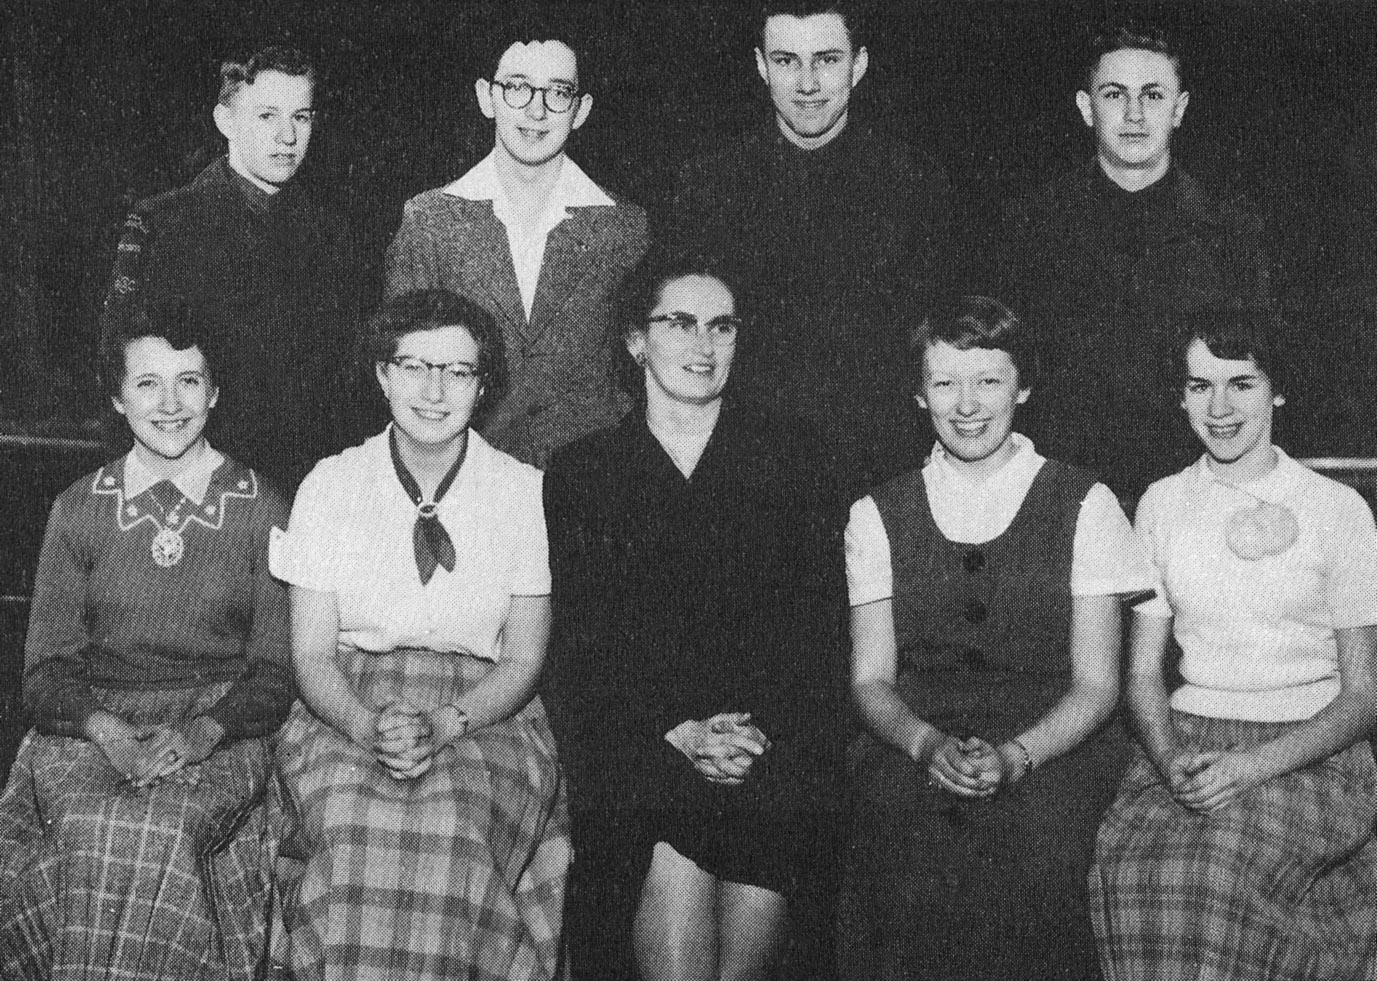 (Click to magnify) FRONT ROW: A. Smalley, L. Cullingham, Mrs. Lennox, H. Feasby, President, V. Noble; BACK ROW: Lloyd Wilson, P. Granger, E. May, K. Hockley.